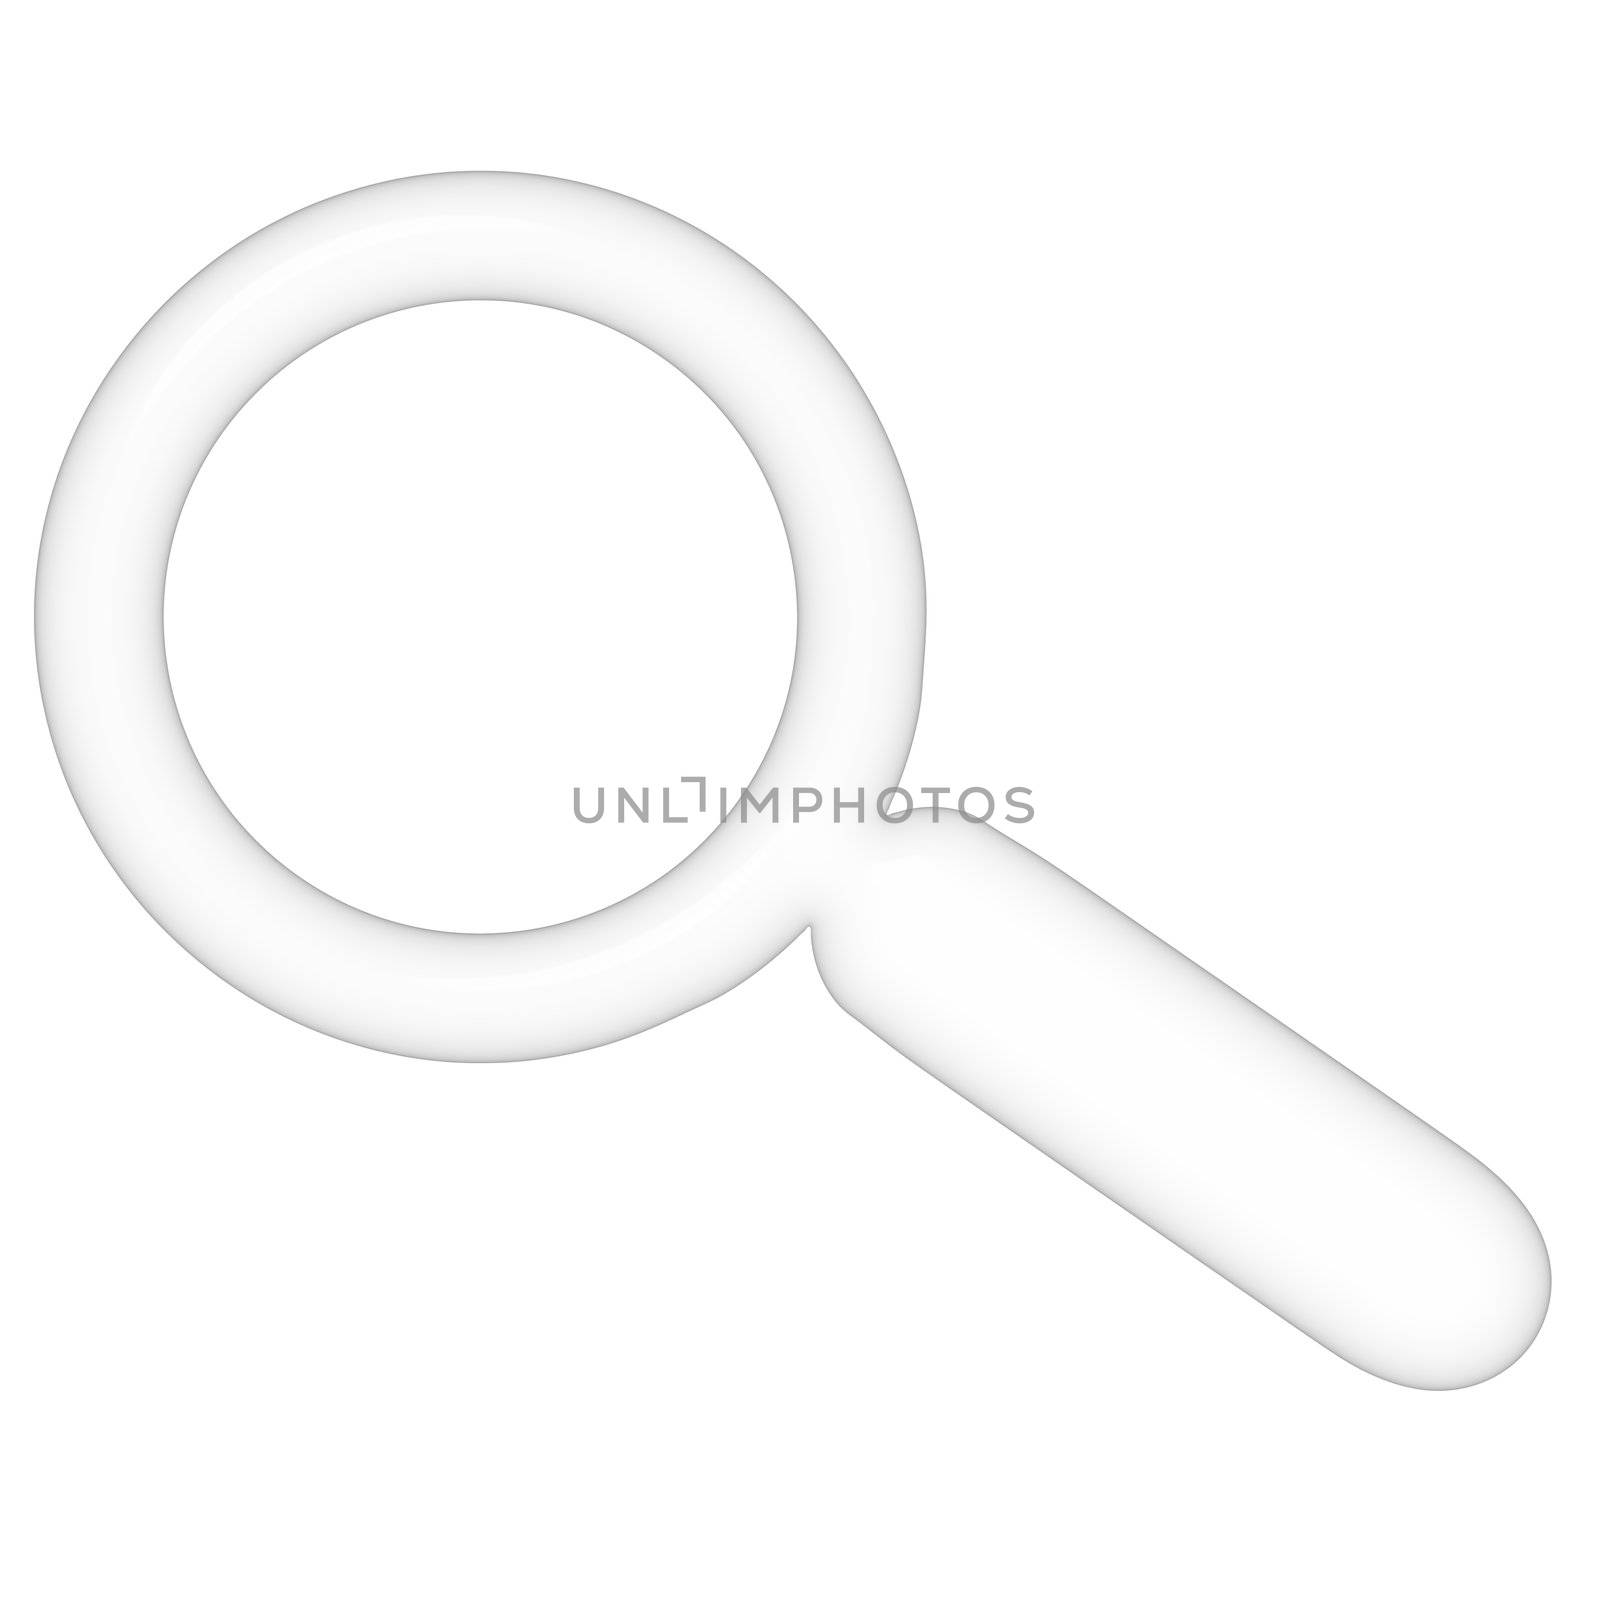 3d magnifying glass isolated in white